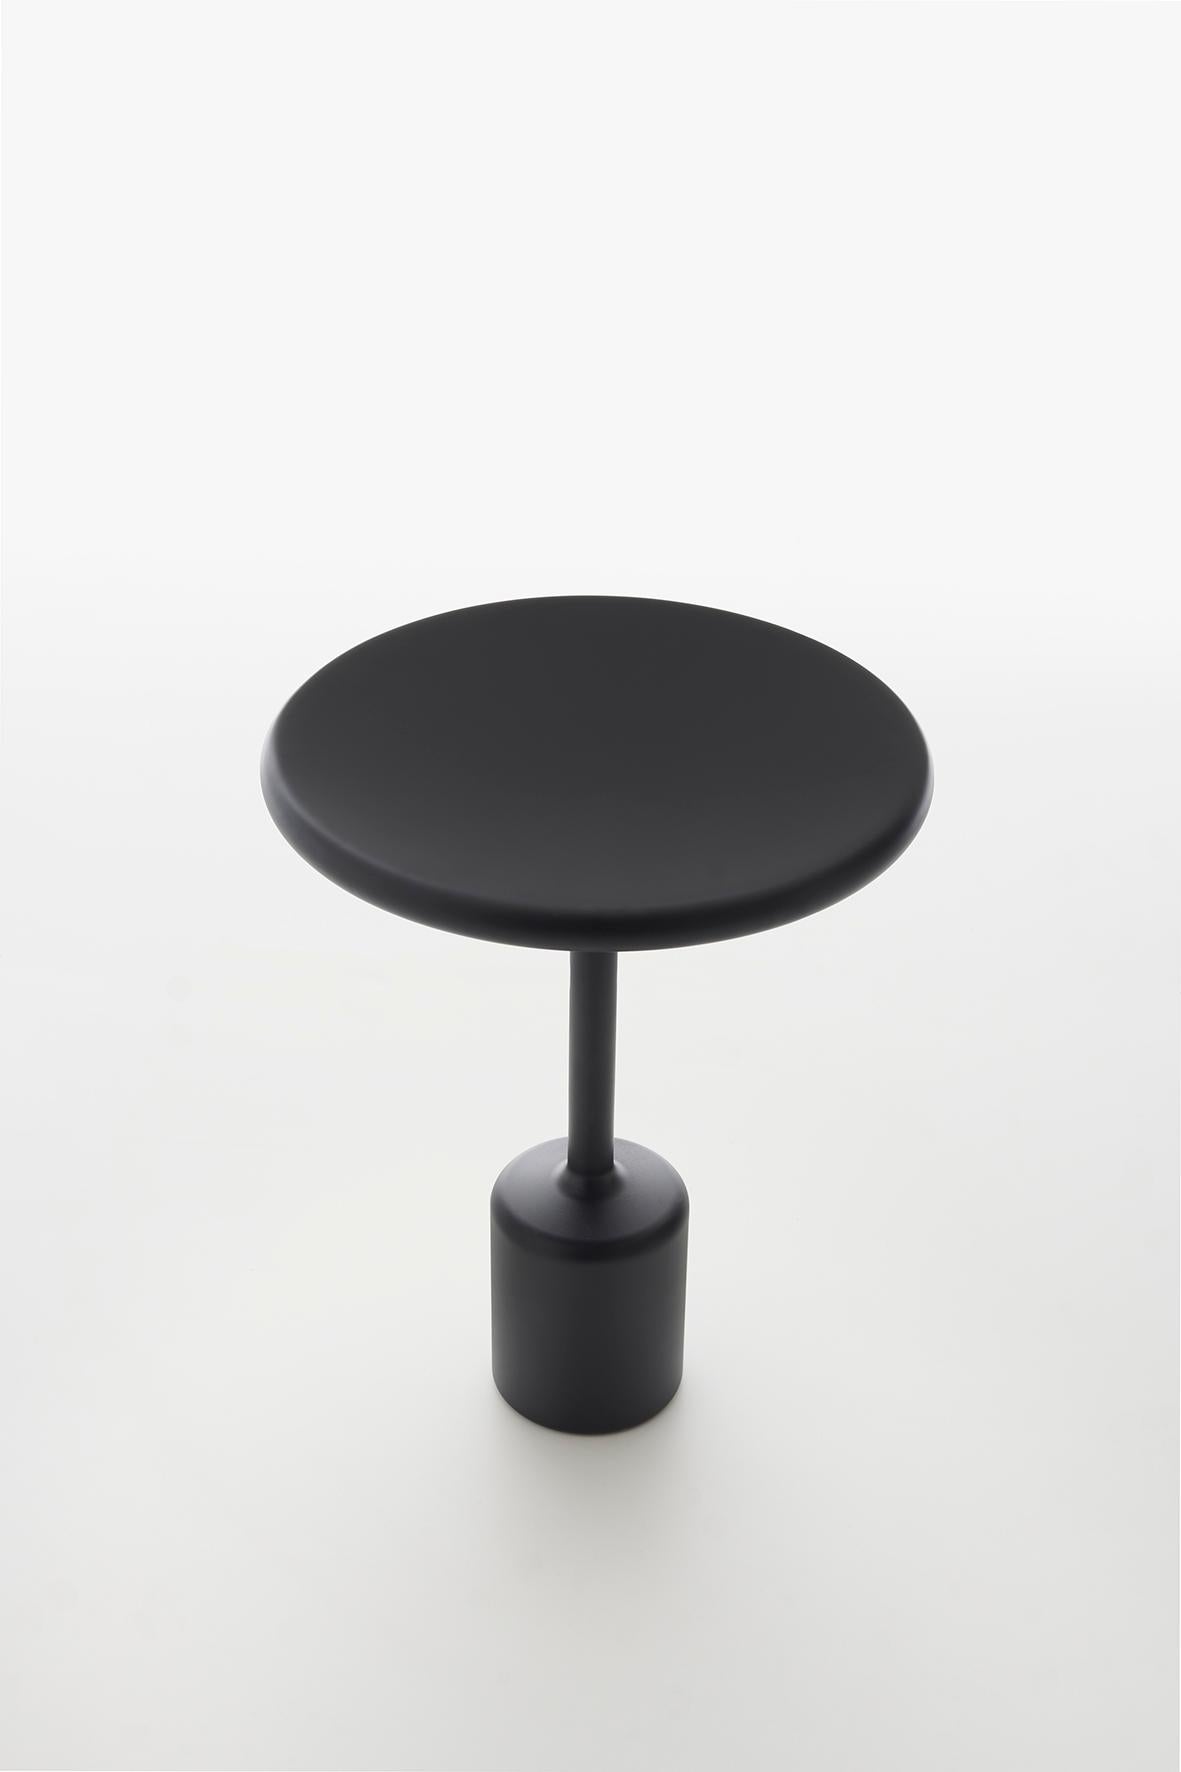 Tavolotto is a set of 3 tables - same look, different proportions. Dide table, center low table, accessory table. Tavolotto appears monolithic, almost as if it were made of a single block, though it is not. It is welded, then polished so perfectly